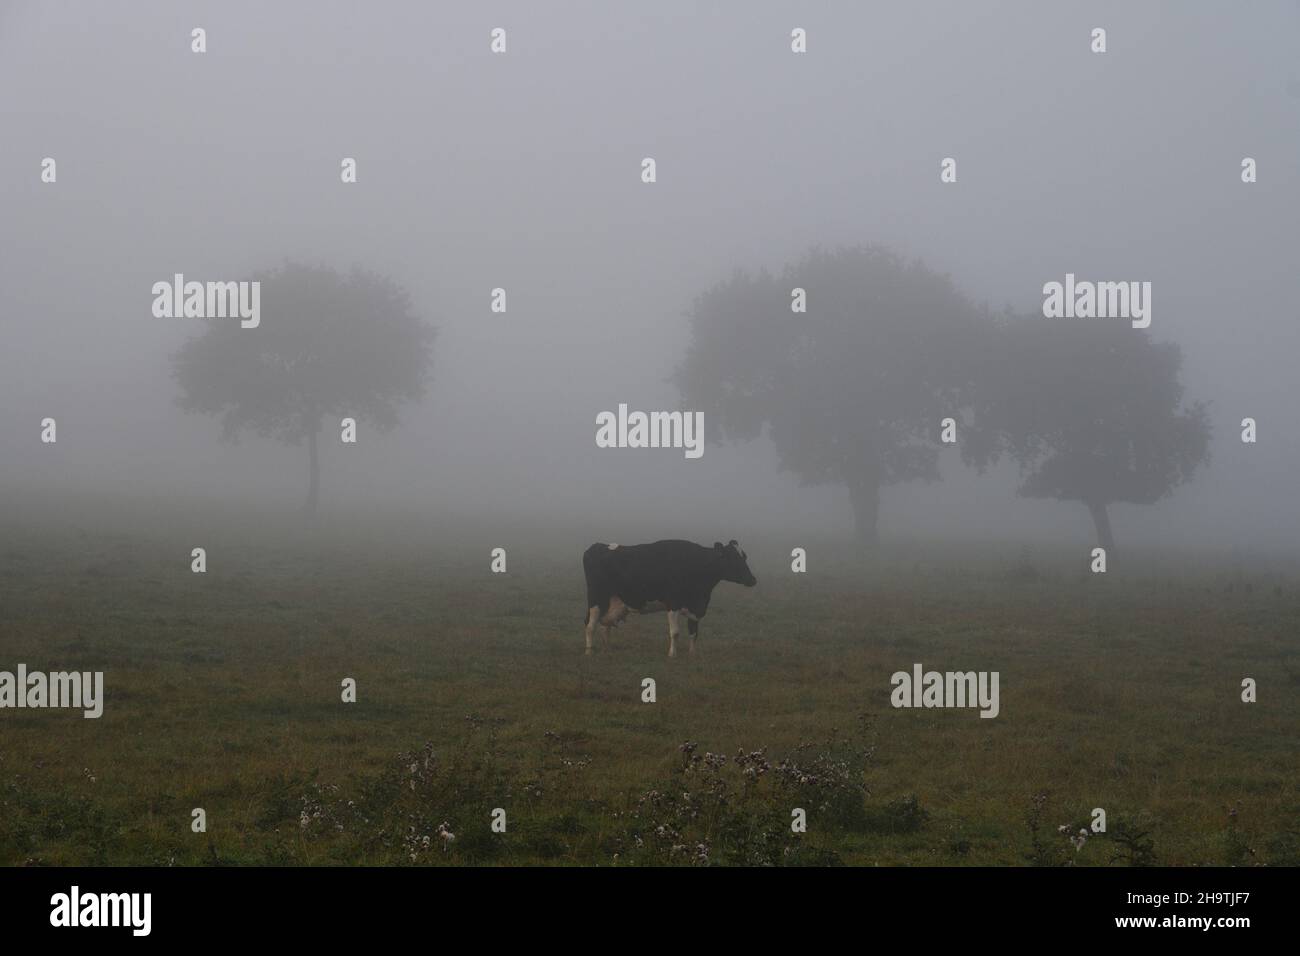 domestic cattle (Bos primigenius f. taurus), black and white milker standing on a pasture in dense fog, side view, France, Brittany, Stock Photo